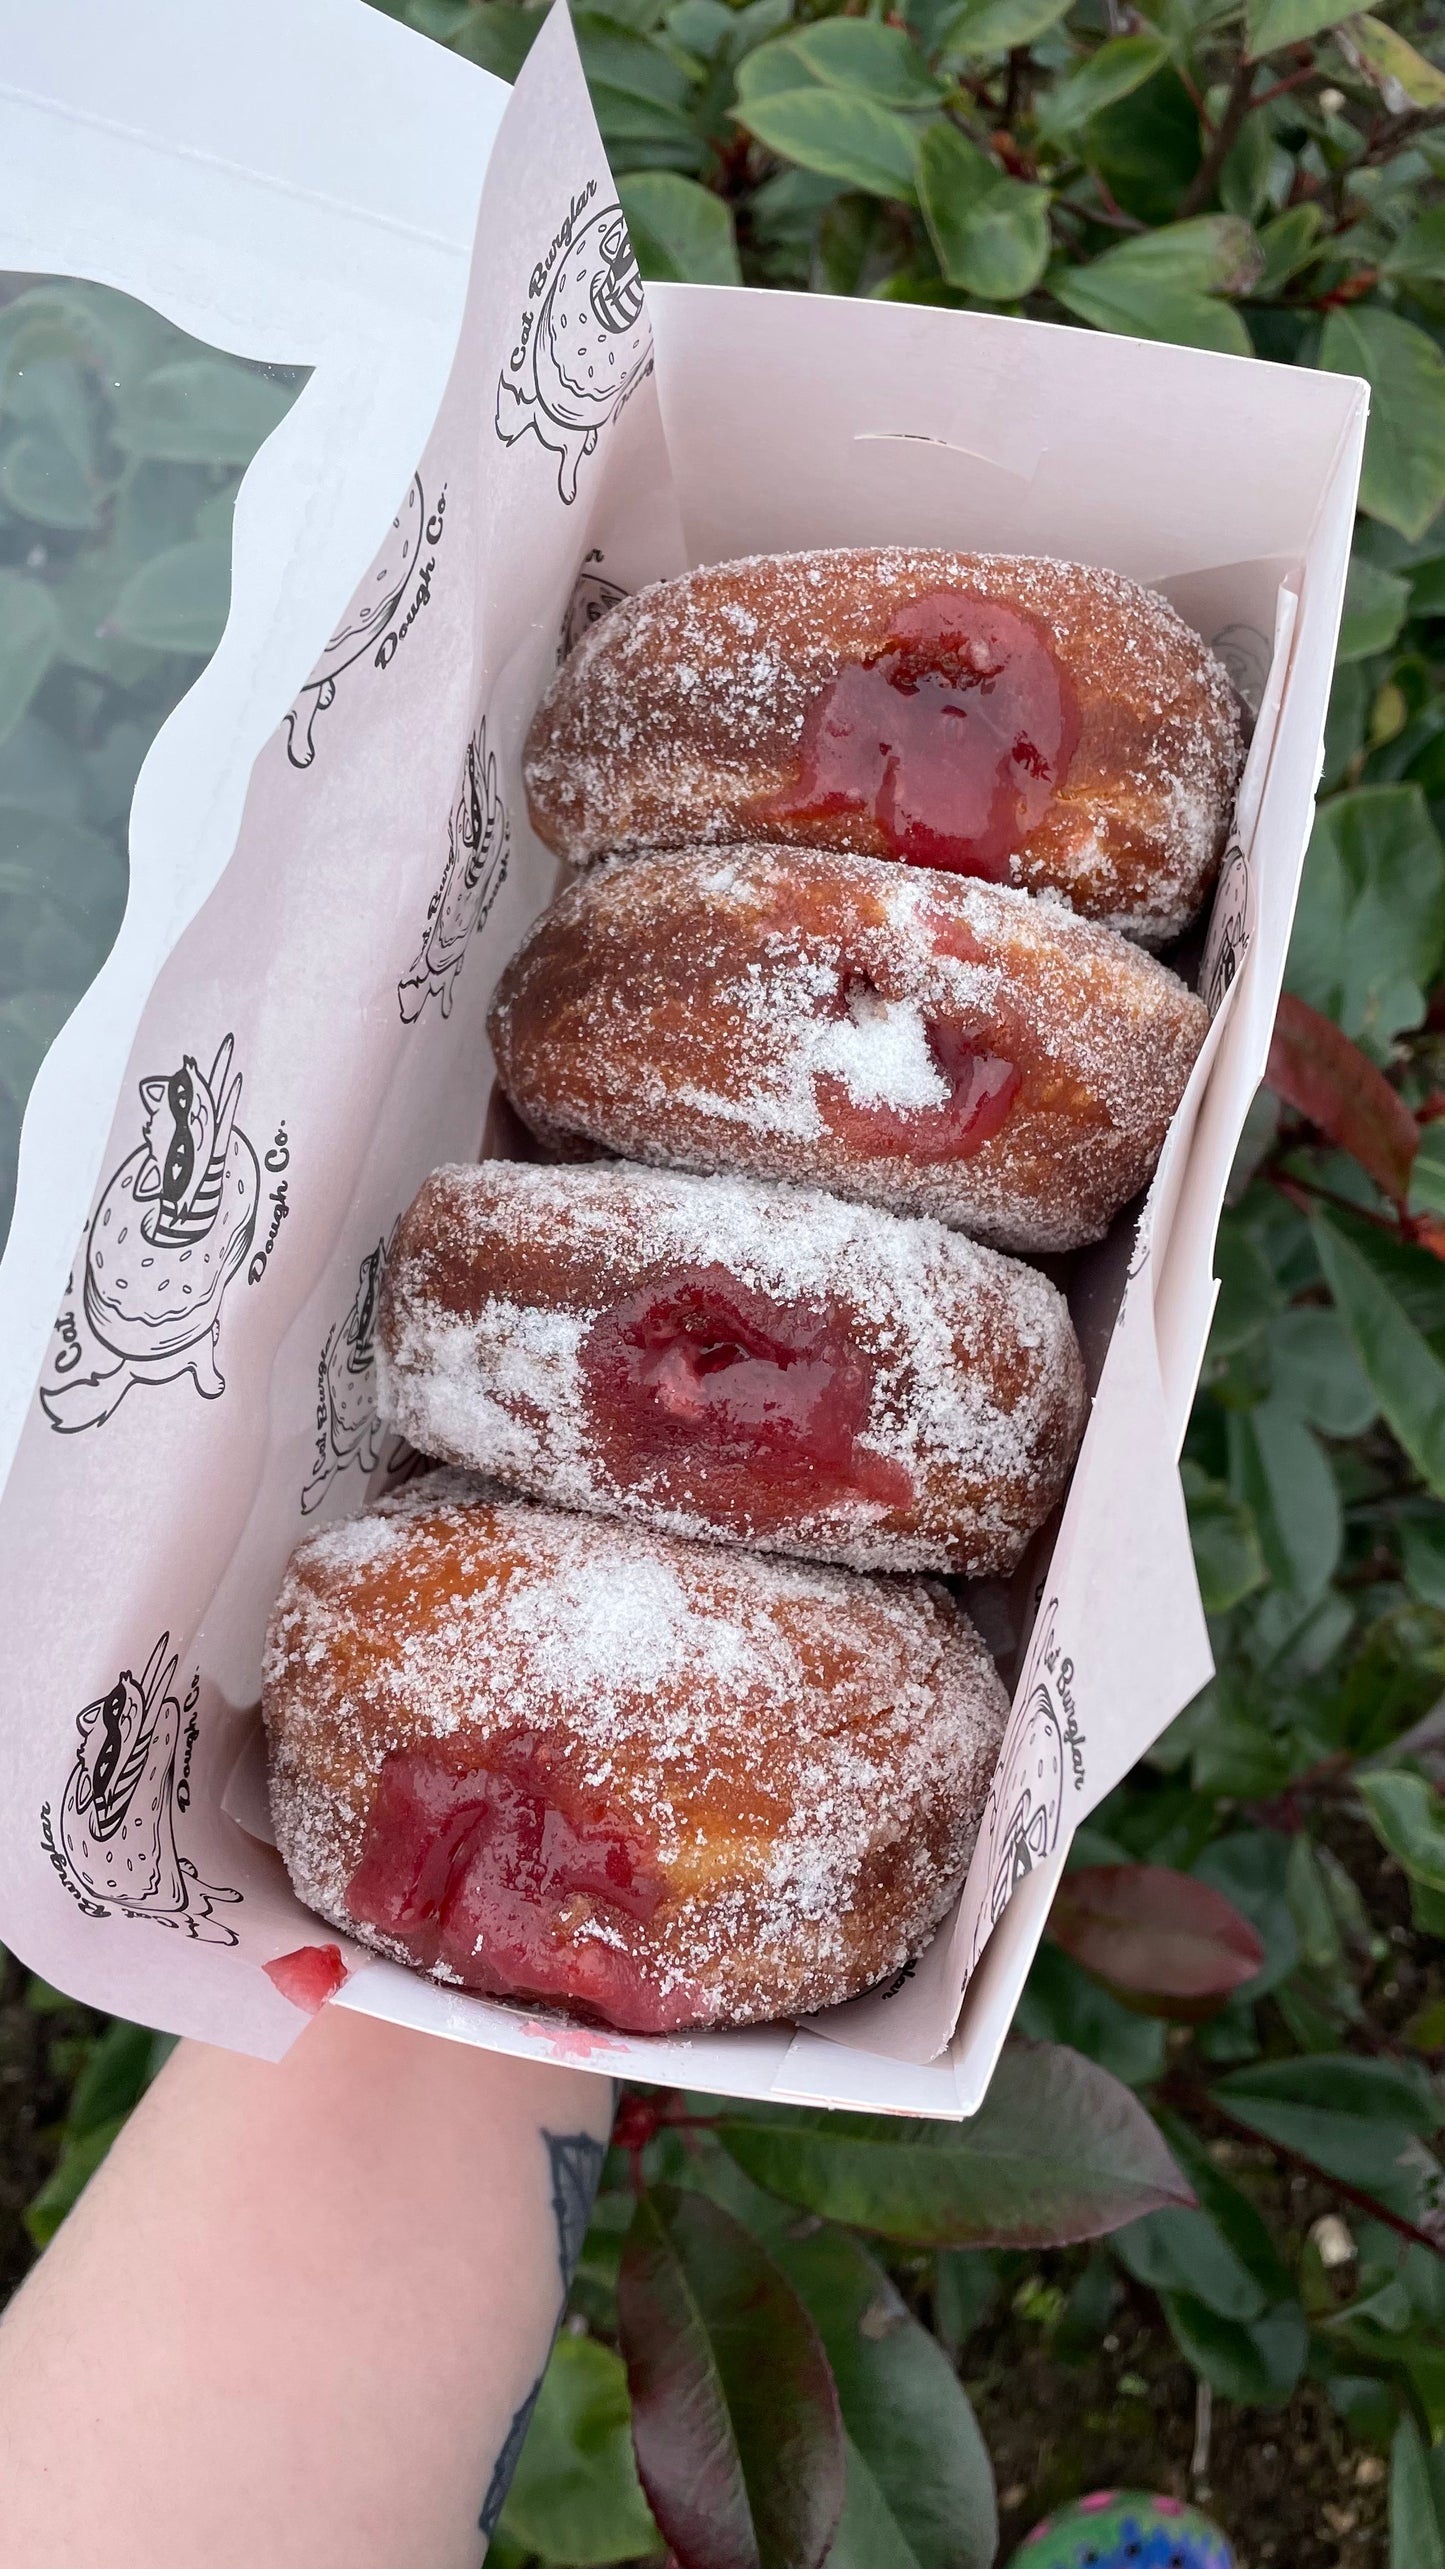 Jam oozes from sugar coated doughnuts